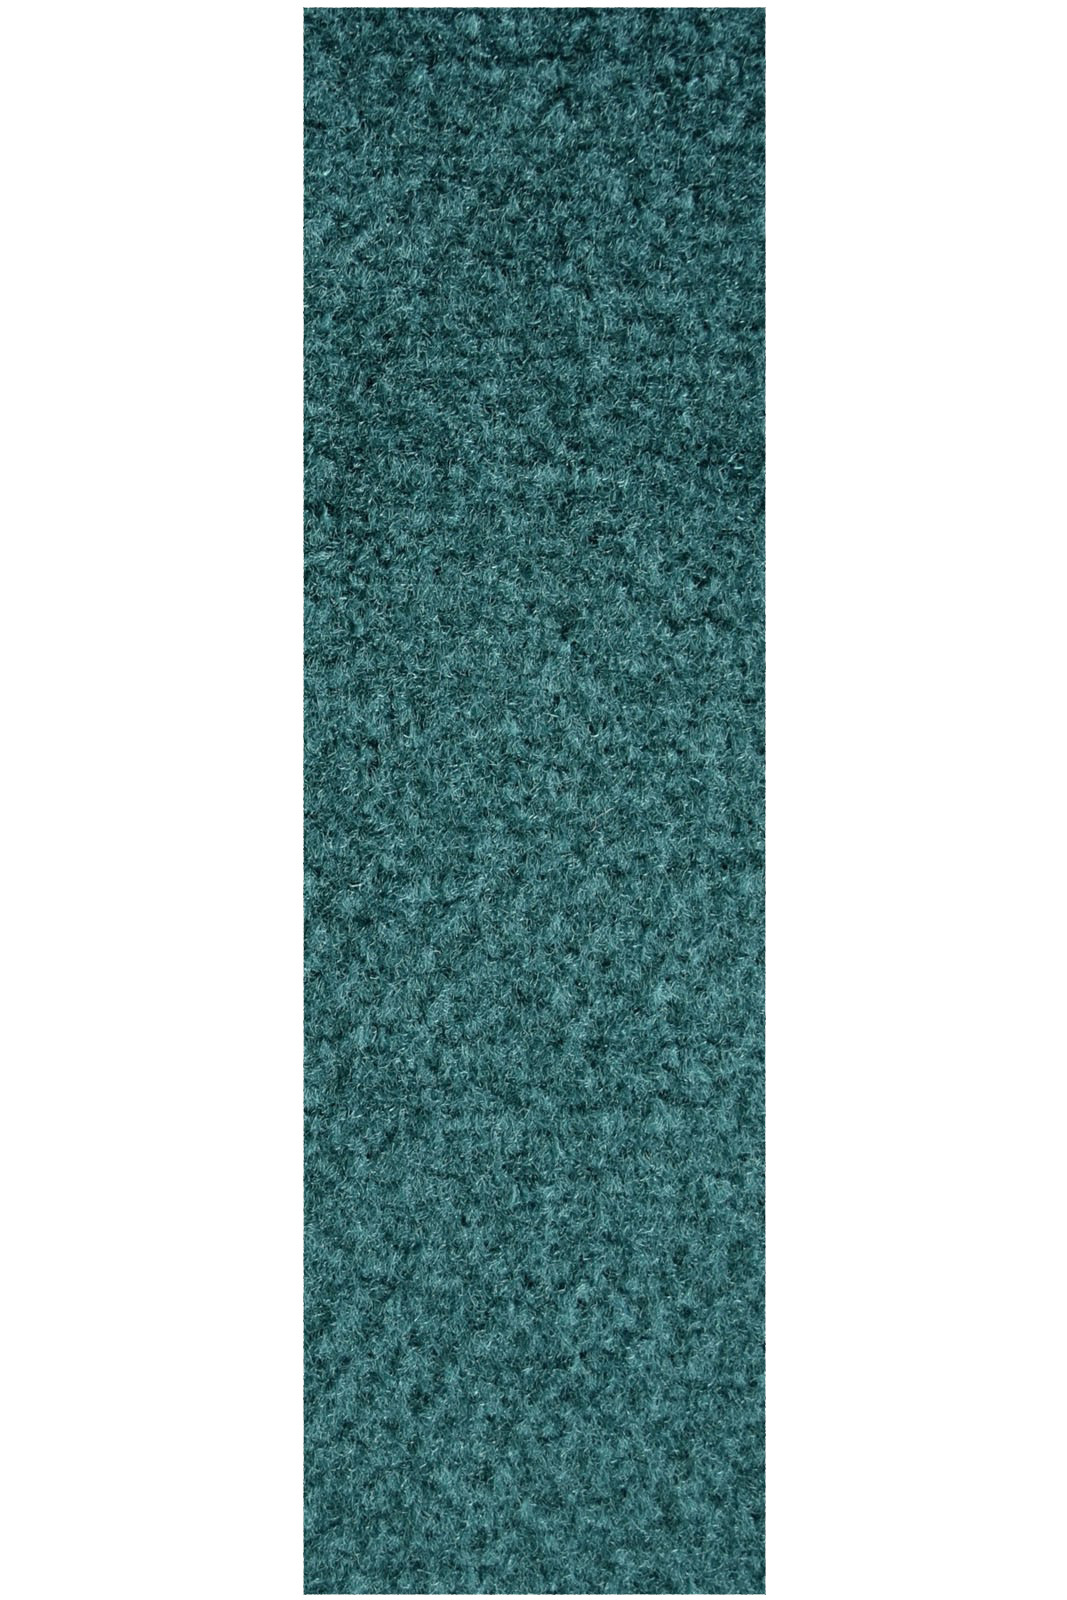 Commercial Indoor/Outdoor Teal Custom Size Runner 2' x 3' - Area Rug with Rubber Marine Backing for Patio, Porch, Deck, Boat, Basement or Garage with Premium Bound Polyester Edges - image 1 of 1